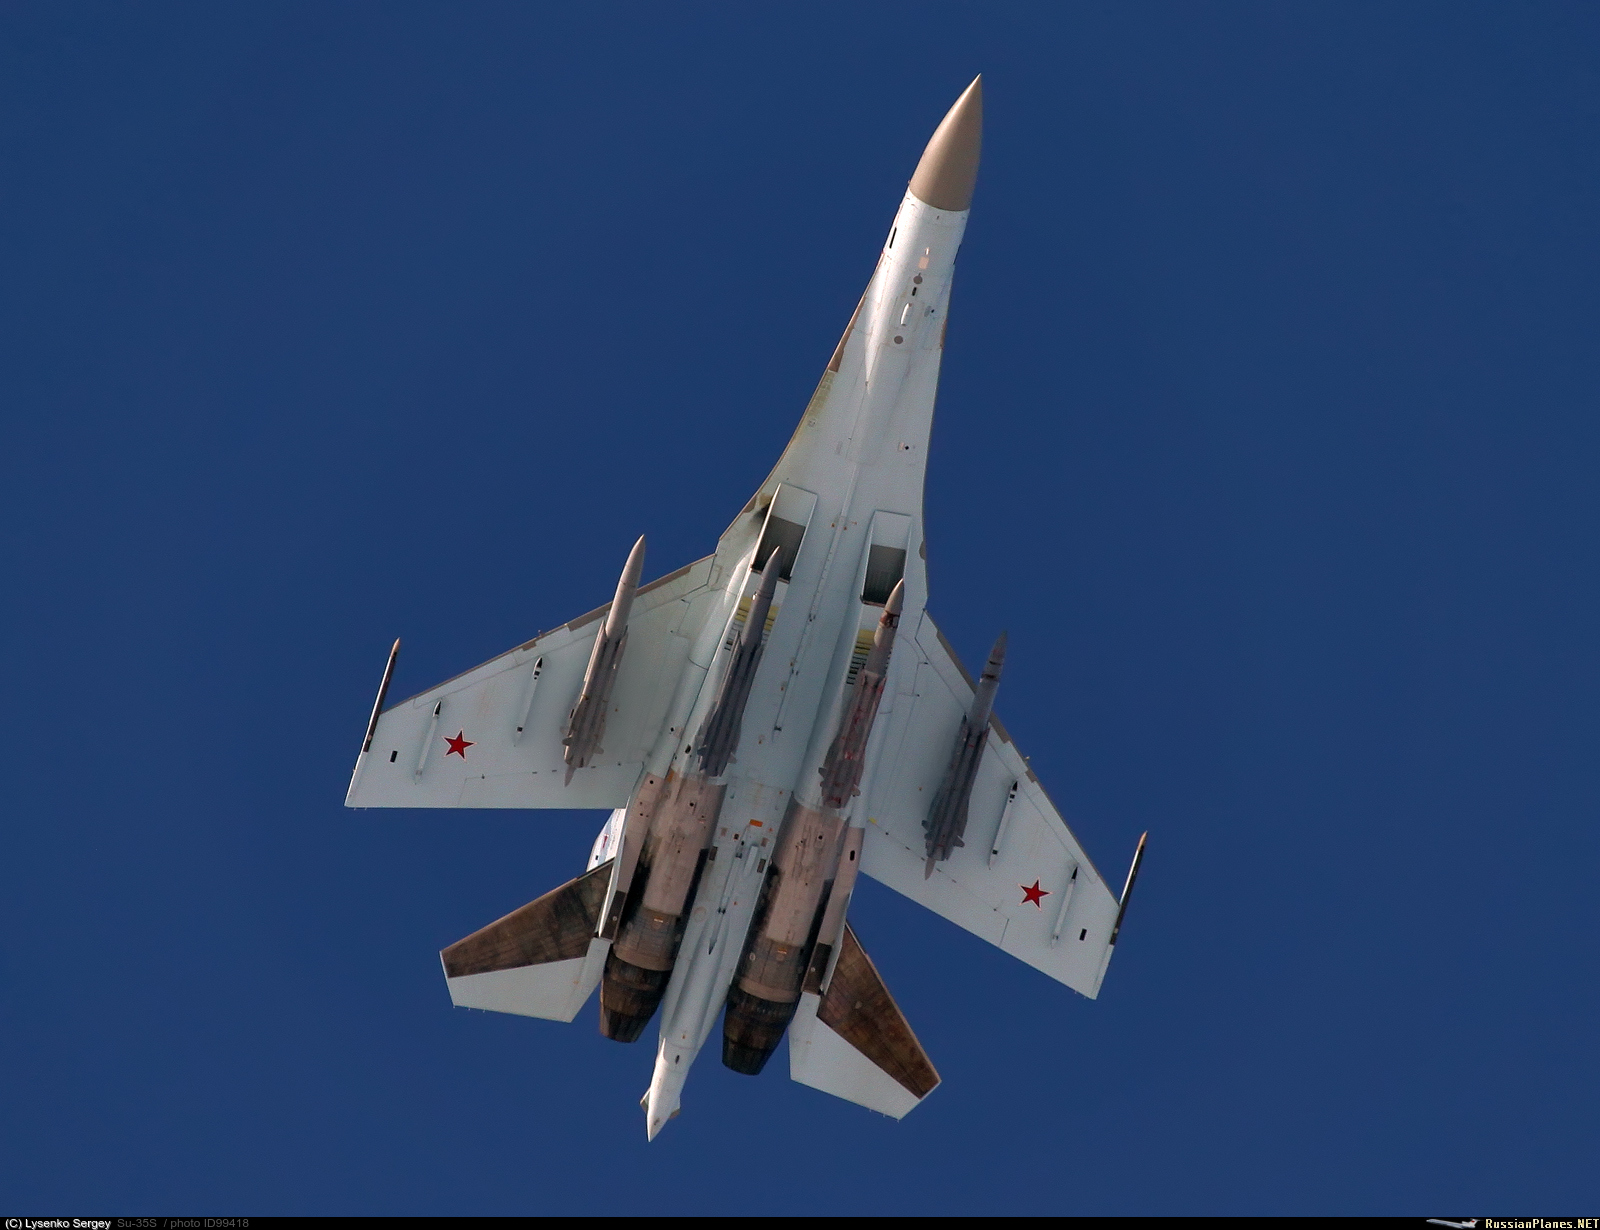 http://russianplanes.net/images/to100000/099418.jpg